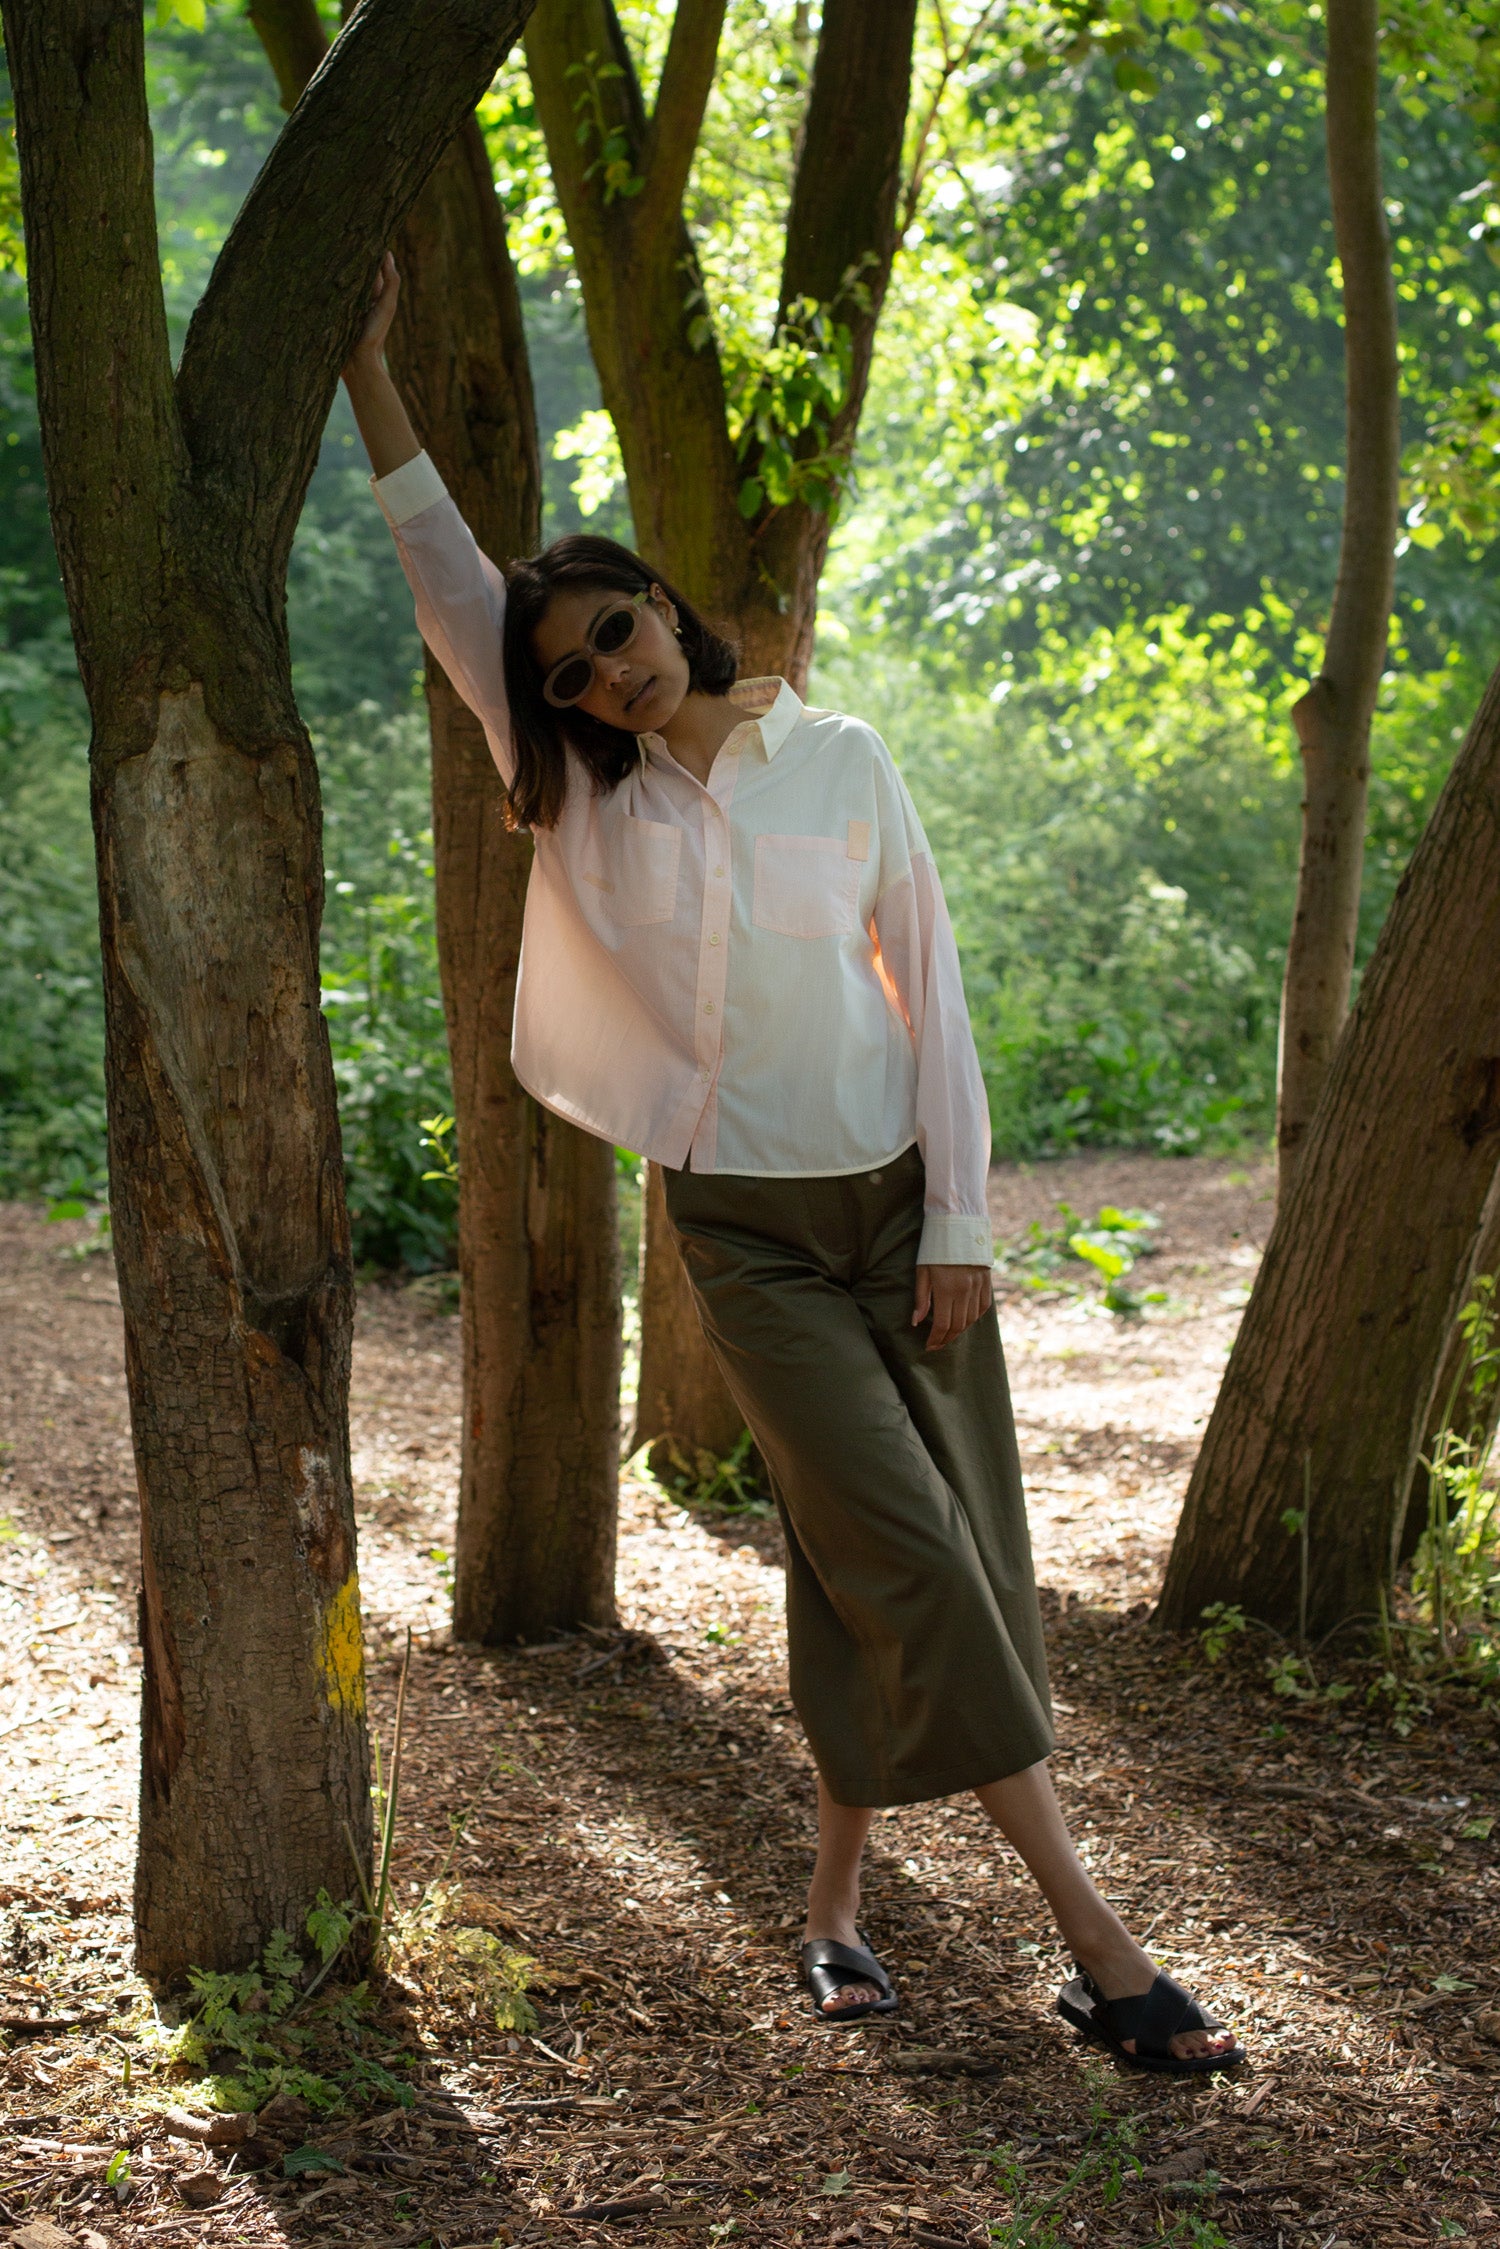 Model stands with one arm raised leaning against a tree, surrounded by nature. She wears the womens patchwork pastel shirt in orange and lemon, the Lela Shirt by Saywood. Boxy silhouette with patch pockets. Worn with the Khaki Amelia Trouser, sunglasses, and sandals.